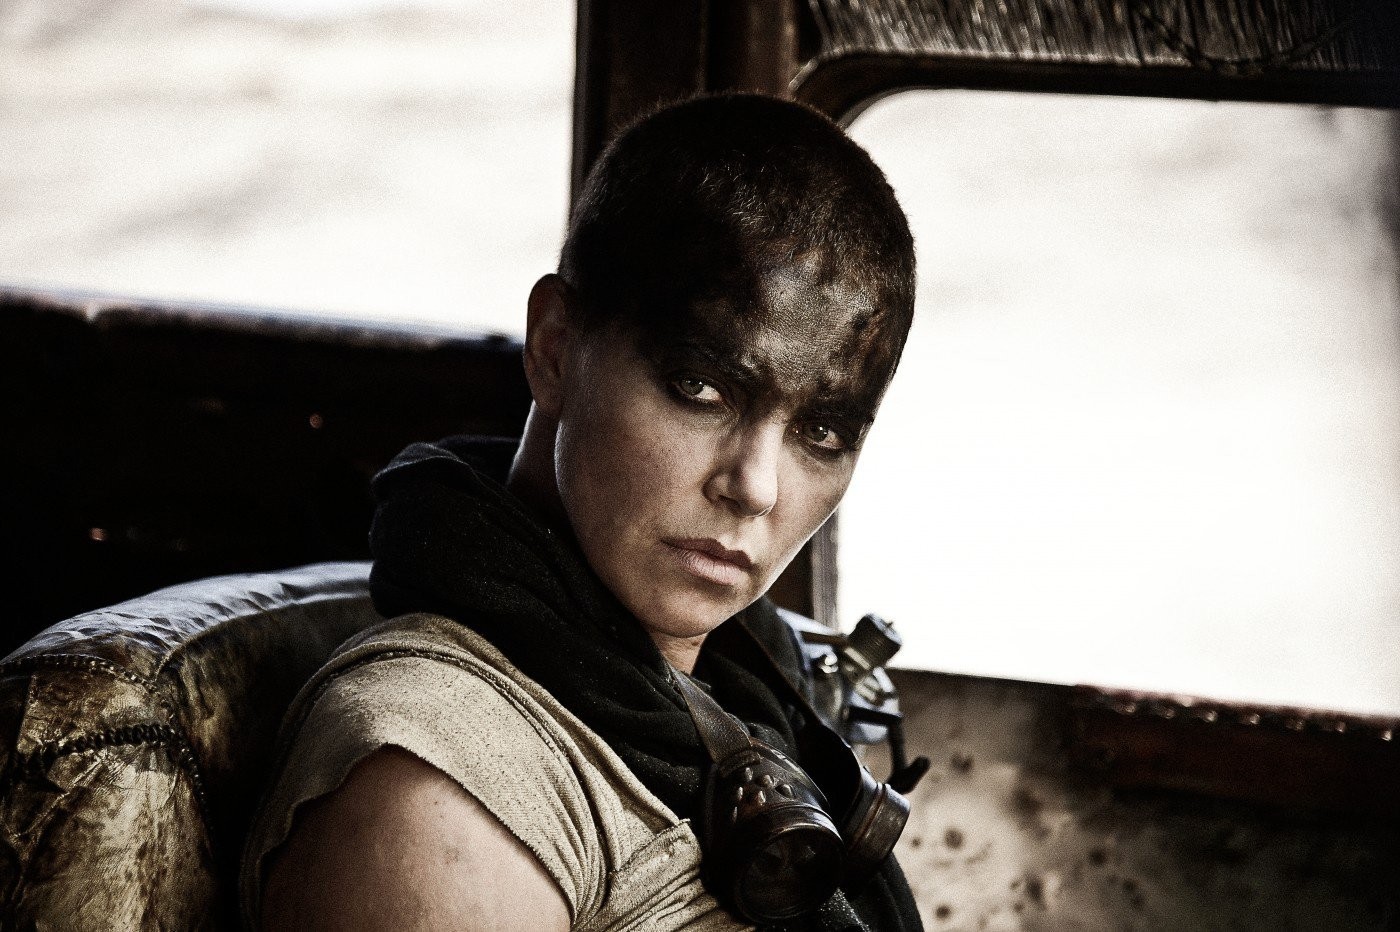 Charlize Theron stars as Imperator Furiosa in Warner Bros. Pictures' Mad Max: Fury Road (2015). Photo credit by Jasin Boland.